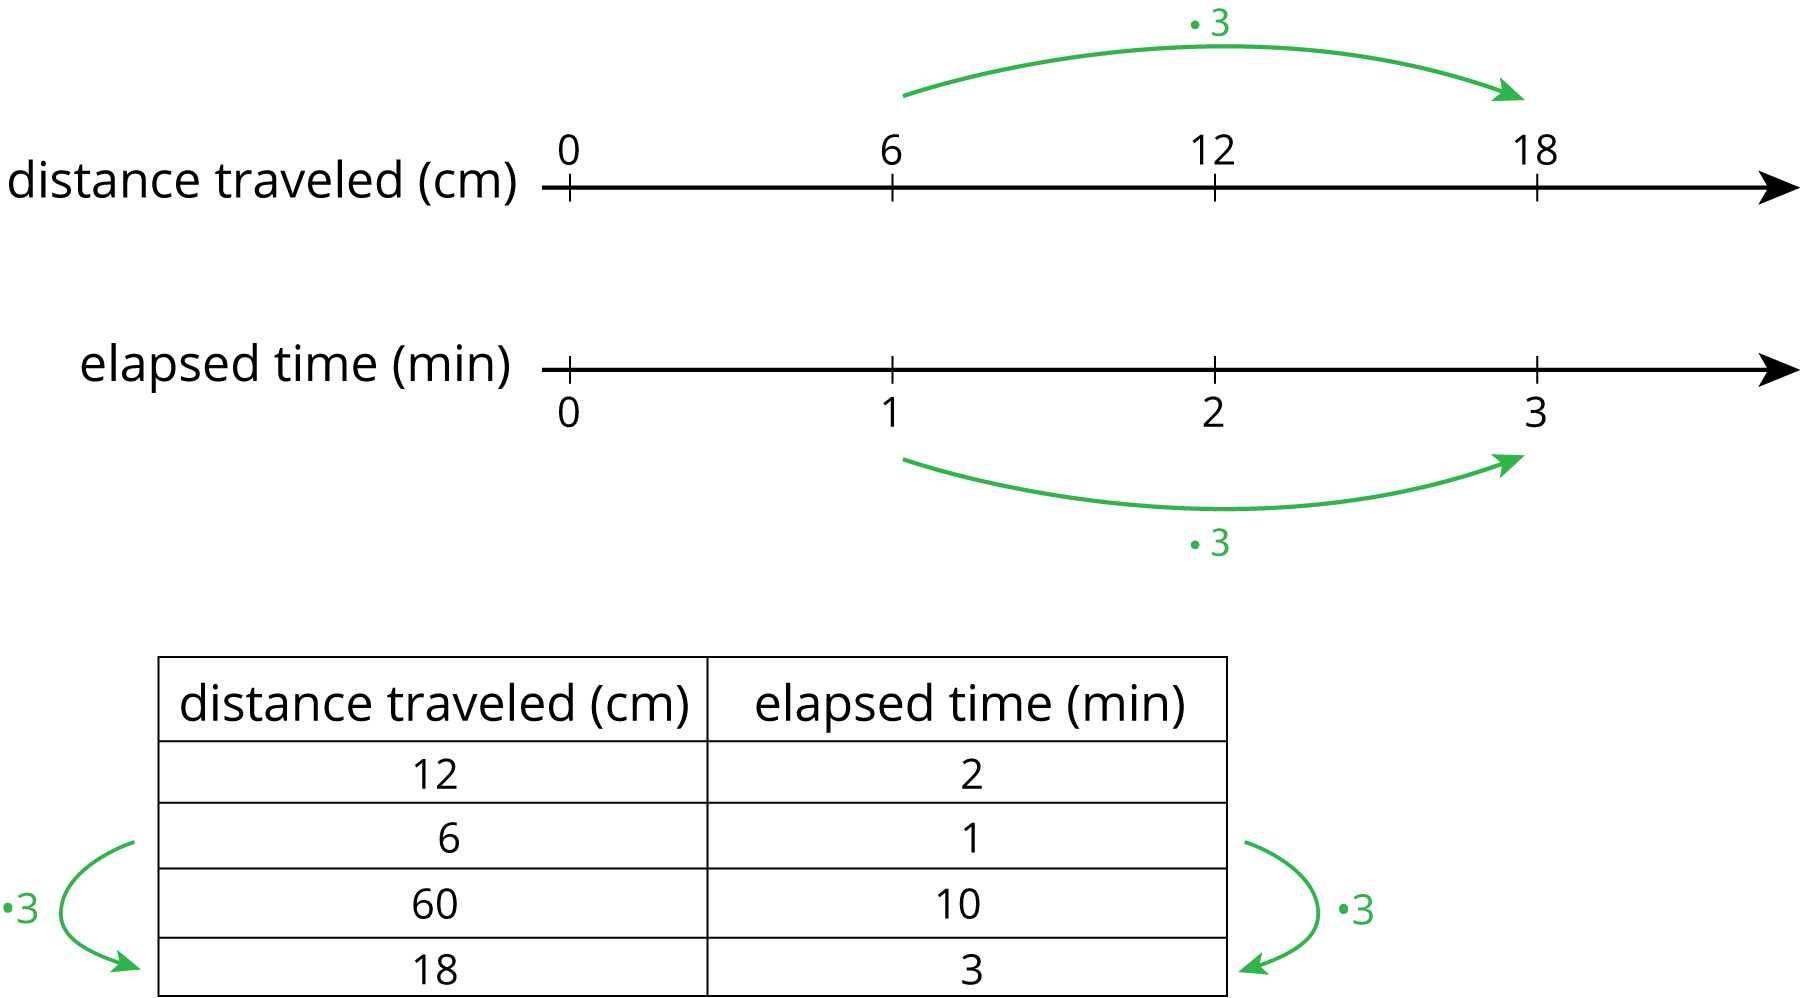 A double number line with 4 evenly spaced tick marks. For "distance traveled, in centimeters" the numbers 0, 6, 12, and 18 are indicated and an arrow labeled "times 3" is drawn from 6 to 18 . For "elapsed time, in minutes" the numbers 0, 1, 2, and 3 are indicated and an arrow labeled "times 3" is drawn from 1 to 3. A 2-column table with 4 rows of data. The first column is labeled "distance traveled, in centimeters" and the second column is labeled "elapsed time, in minutes." Row 1: 12, 2; Row 2: 6, 1; Row 3: 60, 10; Row 4: 18, 3.